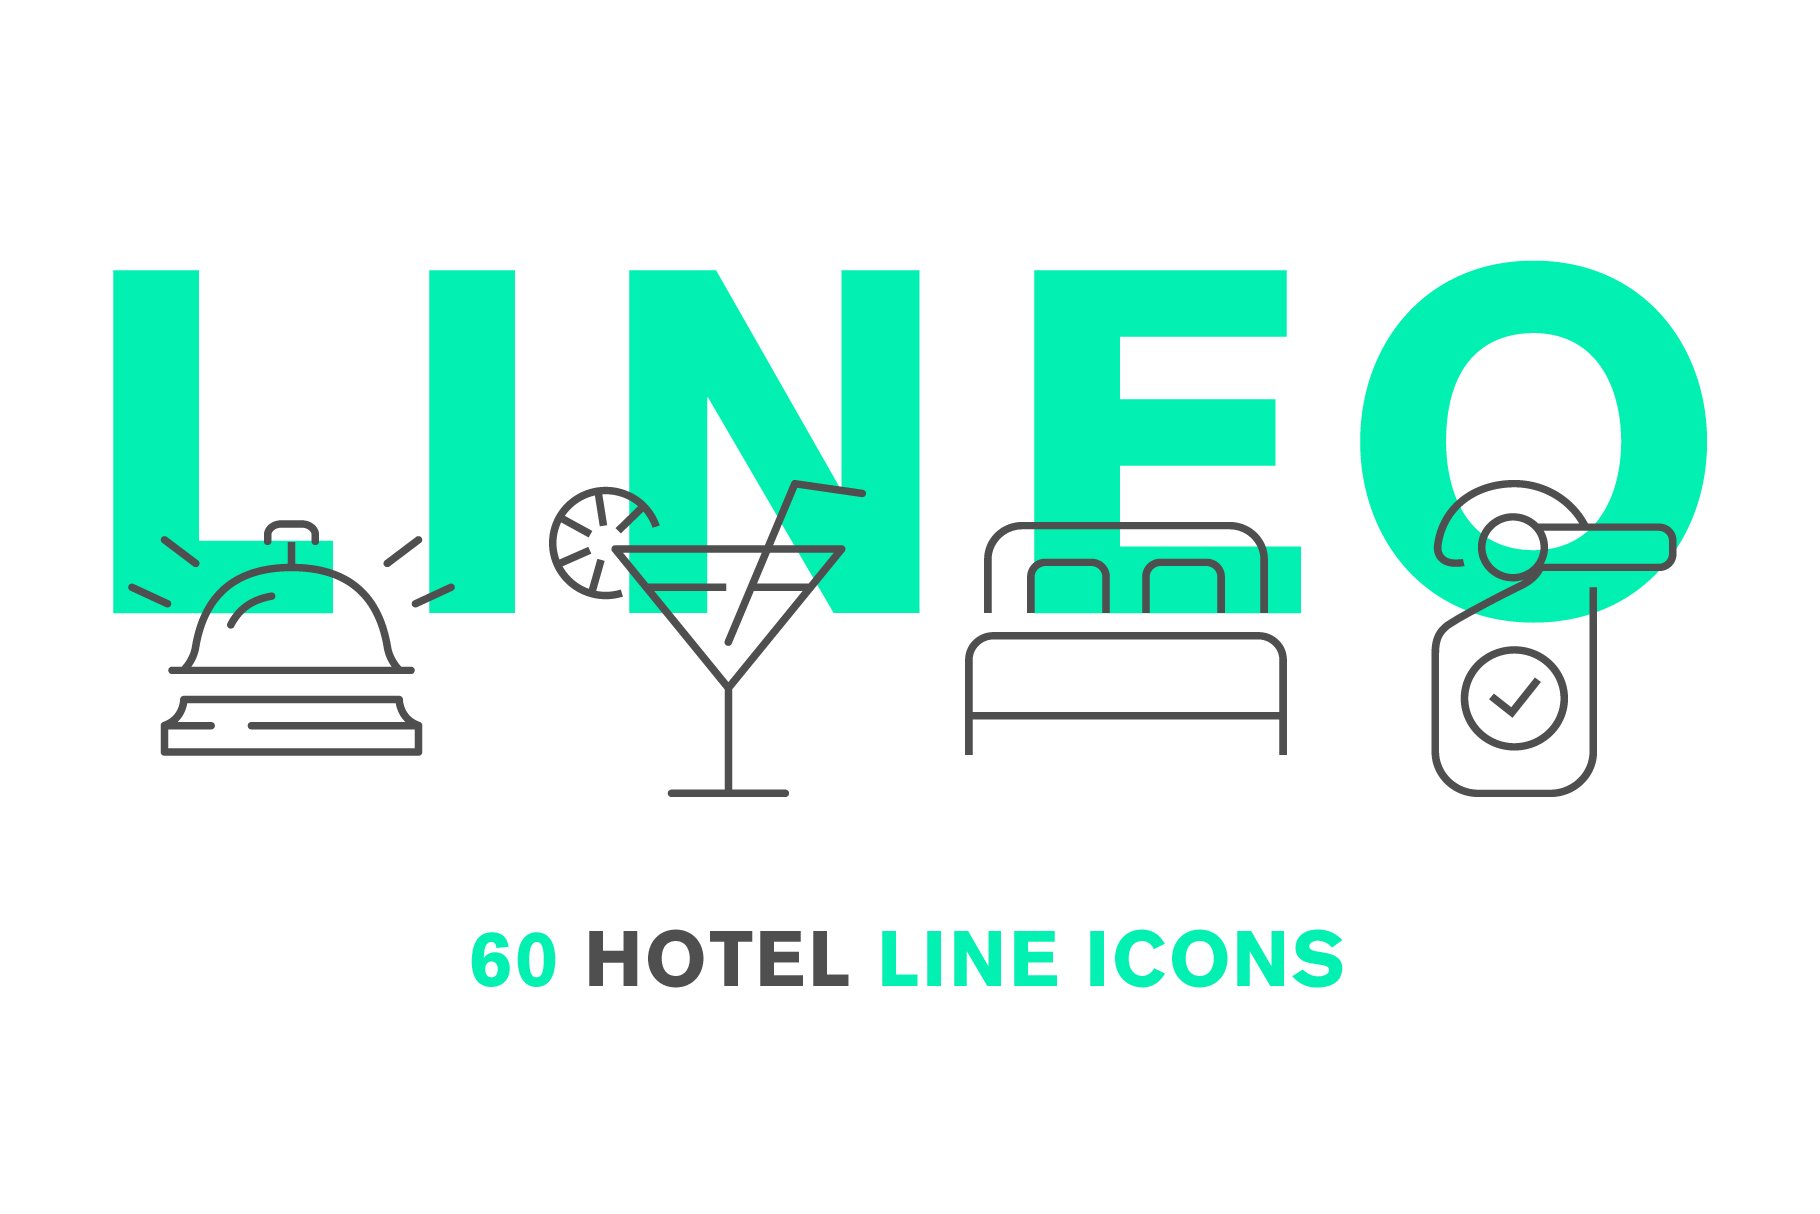 60 HOTEL ICONS cover image.